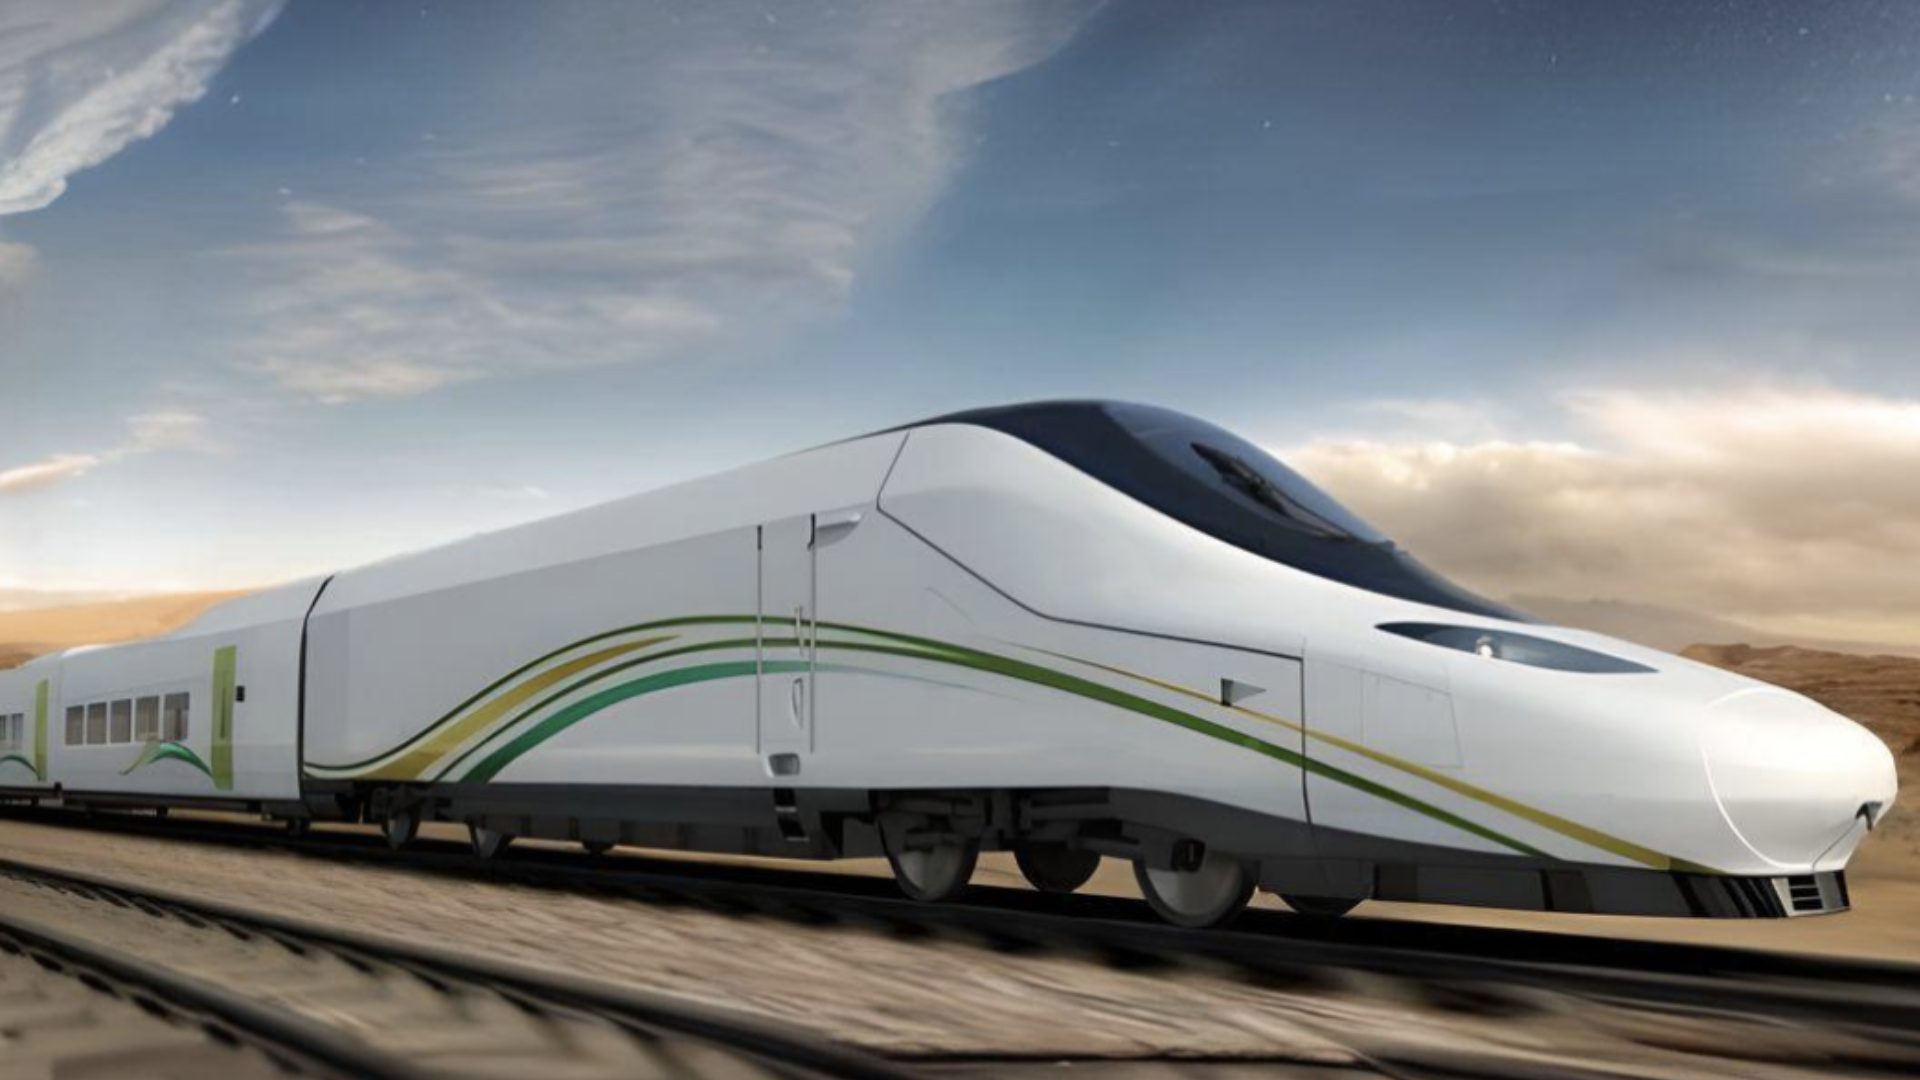 How To Book Haramain High-Speed Railway Train Tickets? (Step-by-Step Guide)